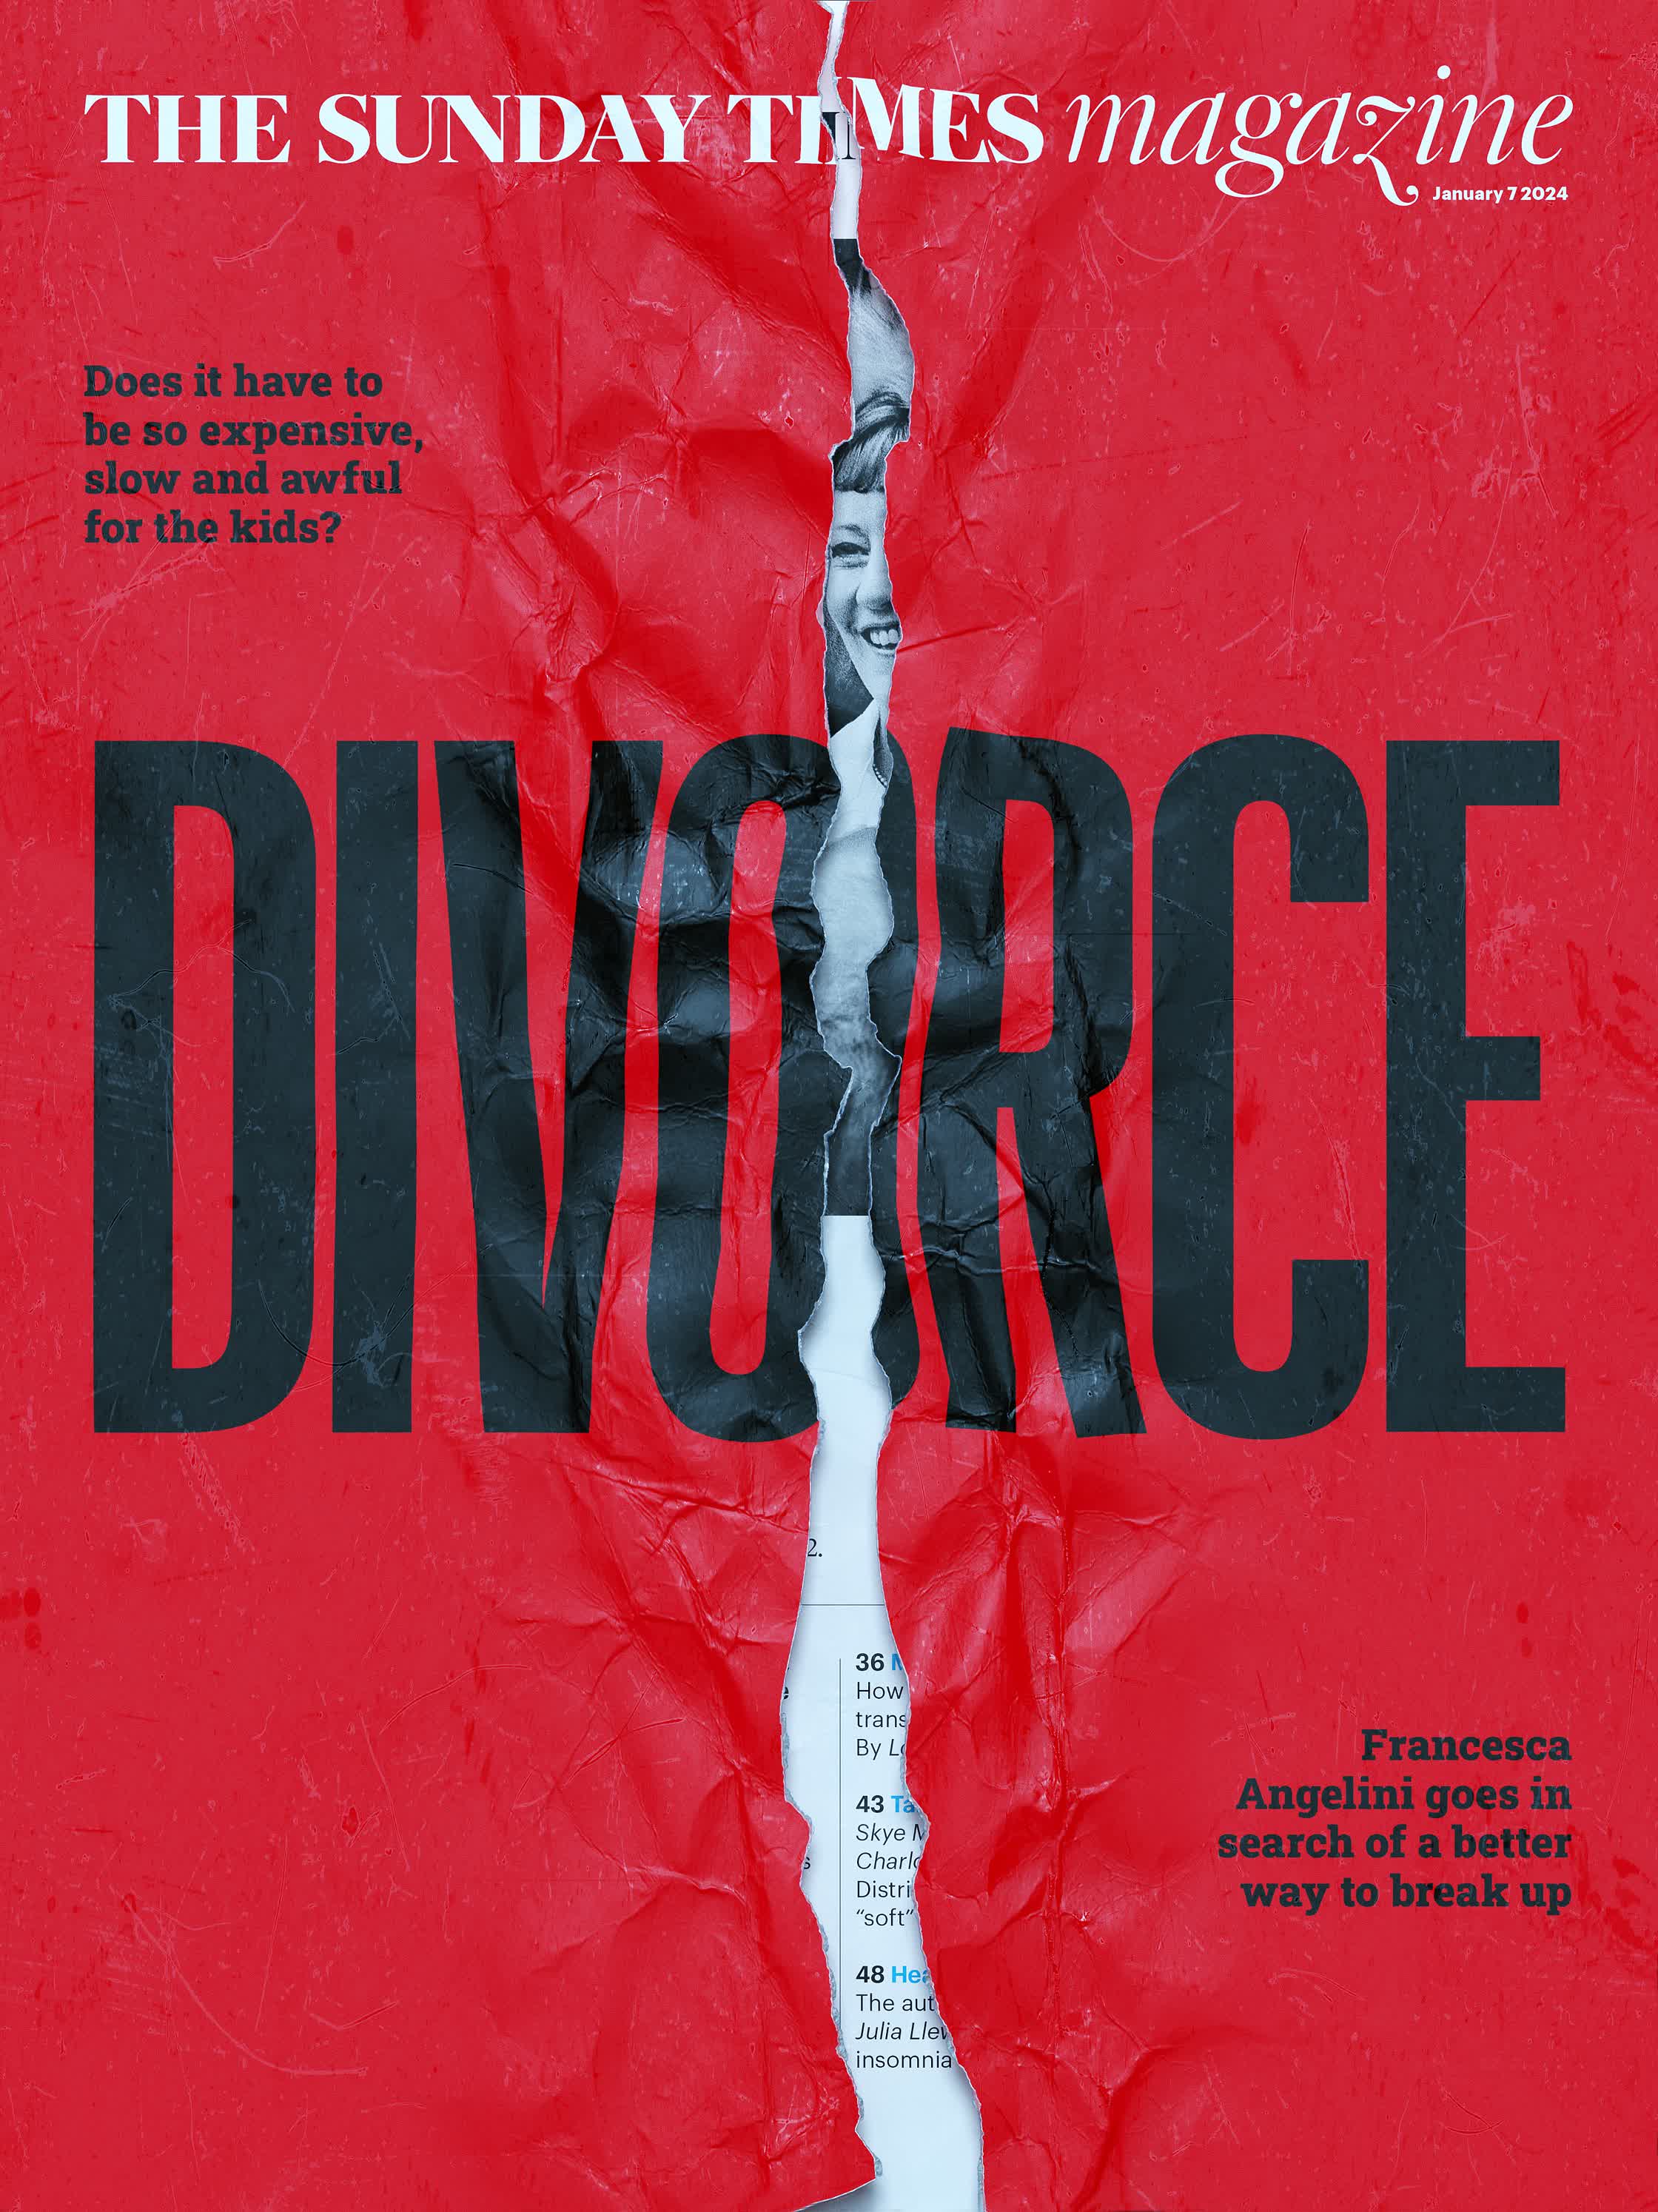 pcrowther_comm by SundayTimes_Divorce_Cover.jpg